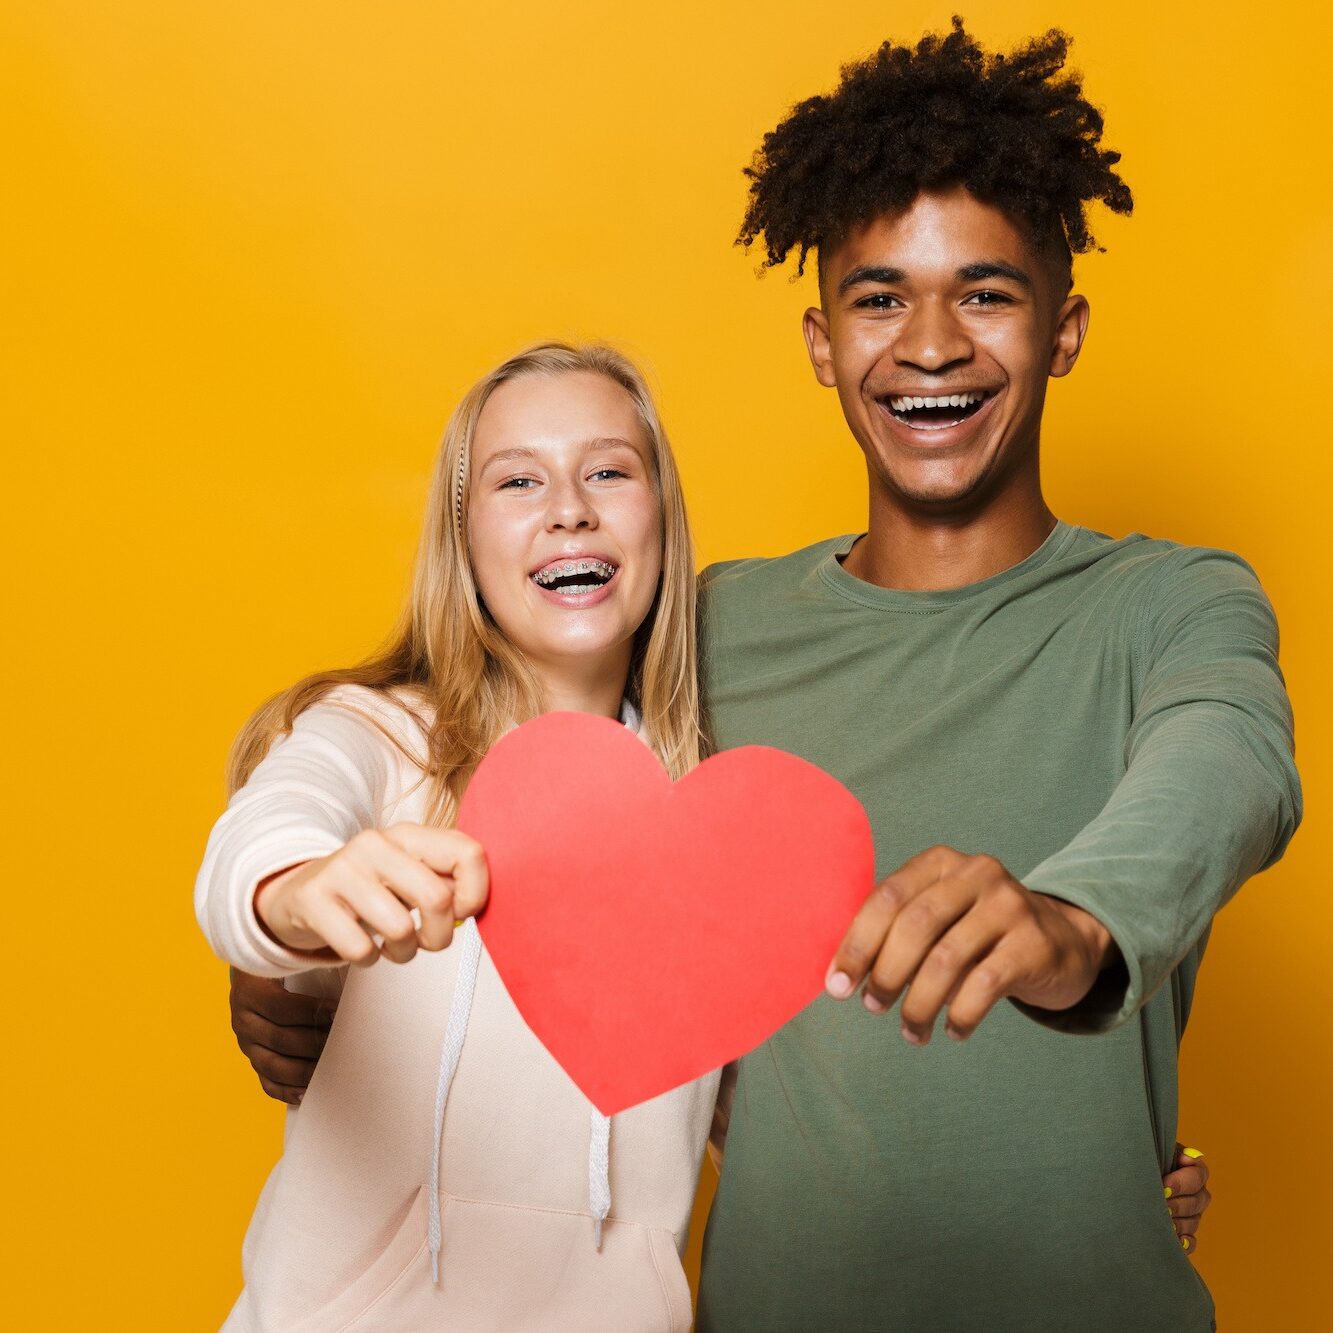 Photo of teenage friends man and woman 16-18 holding paper heart isolated over yellow background